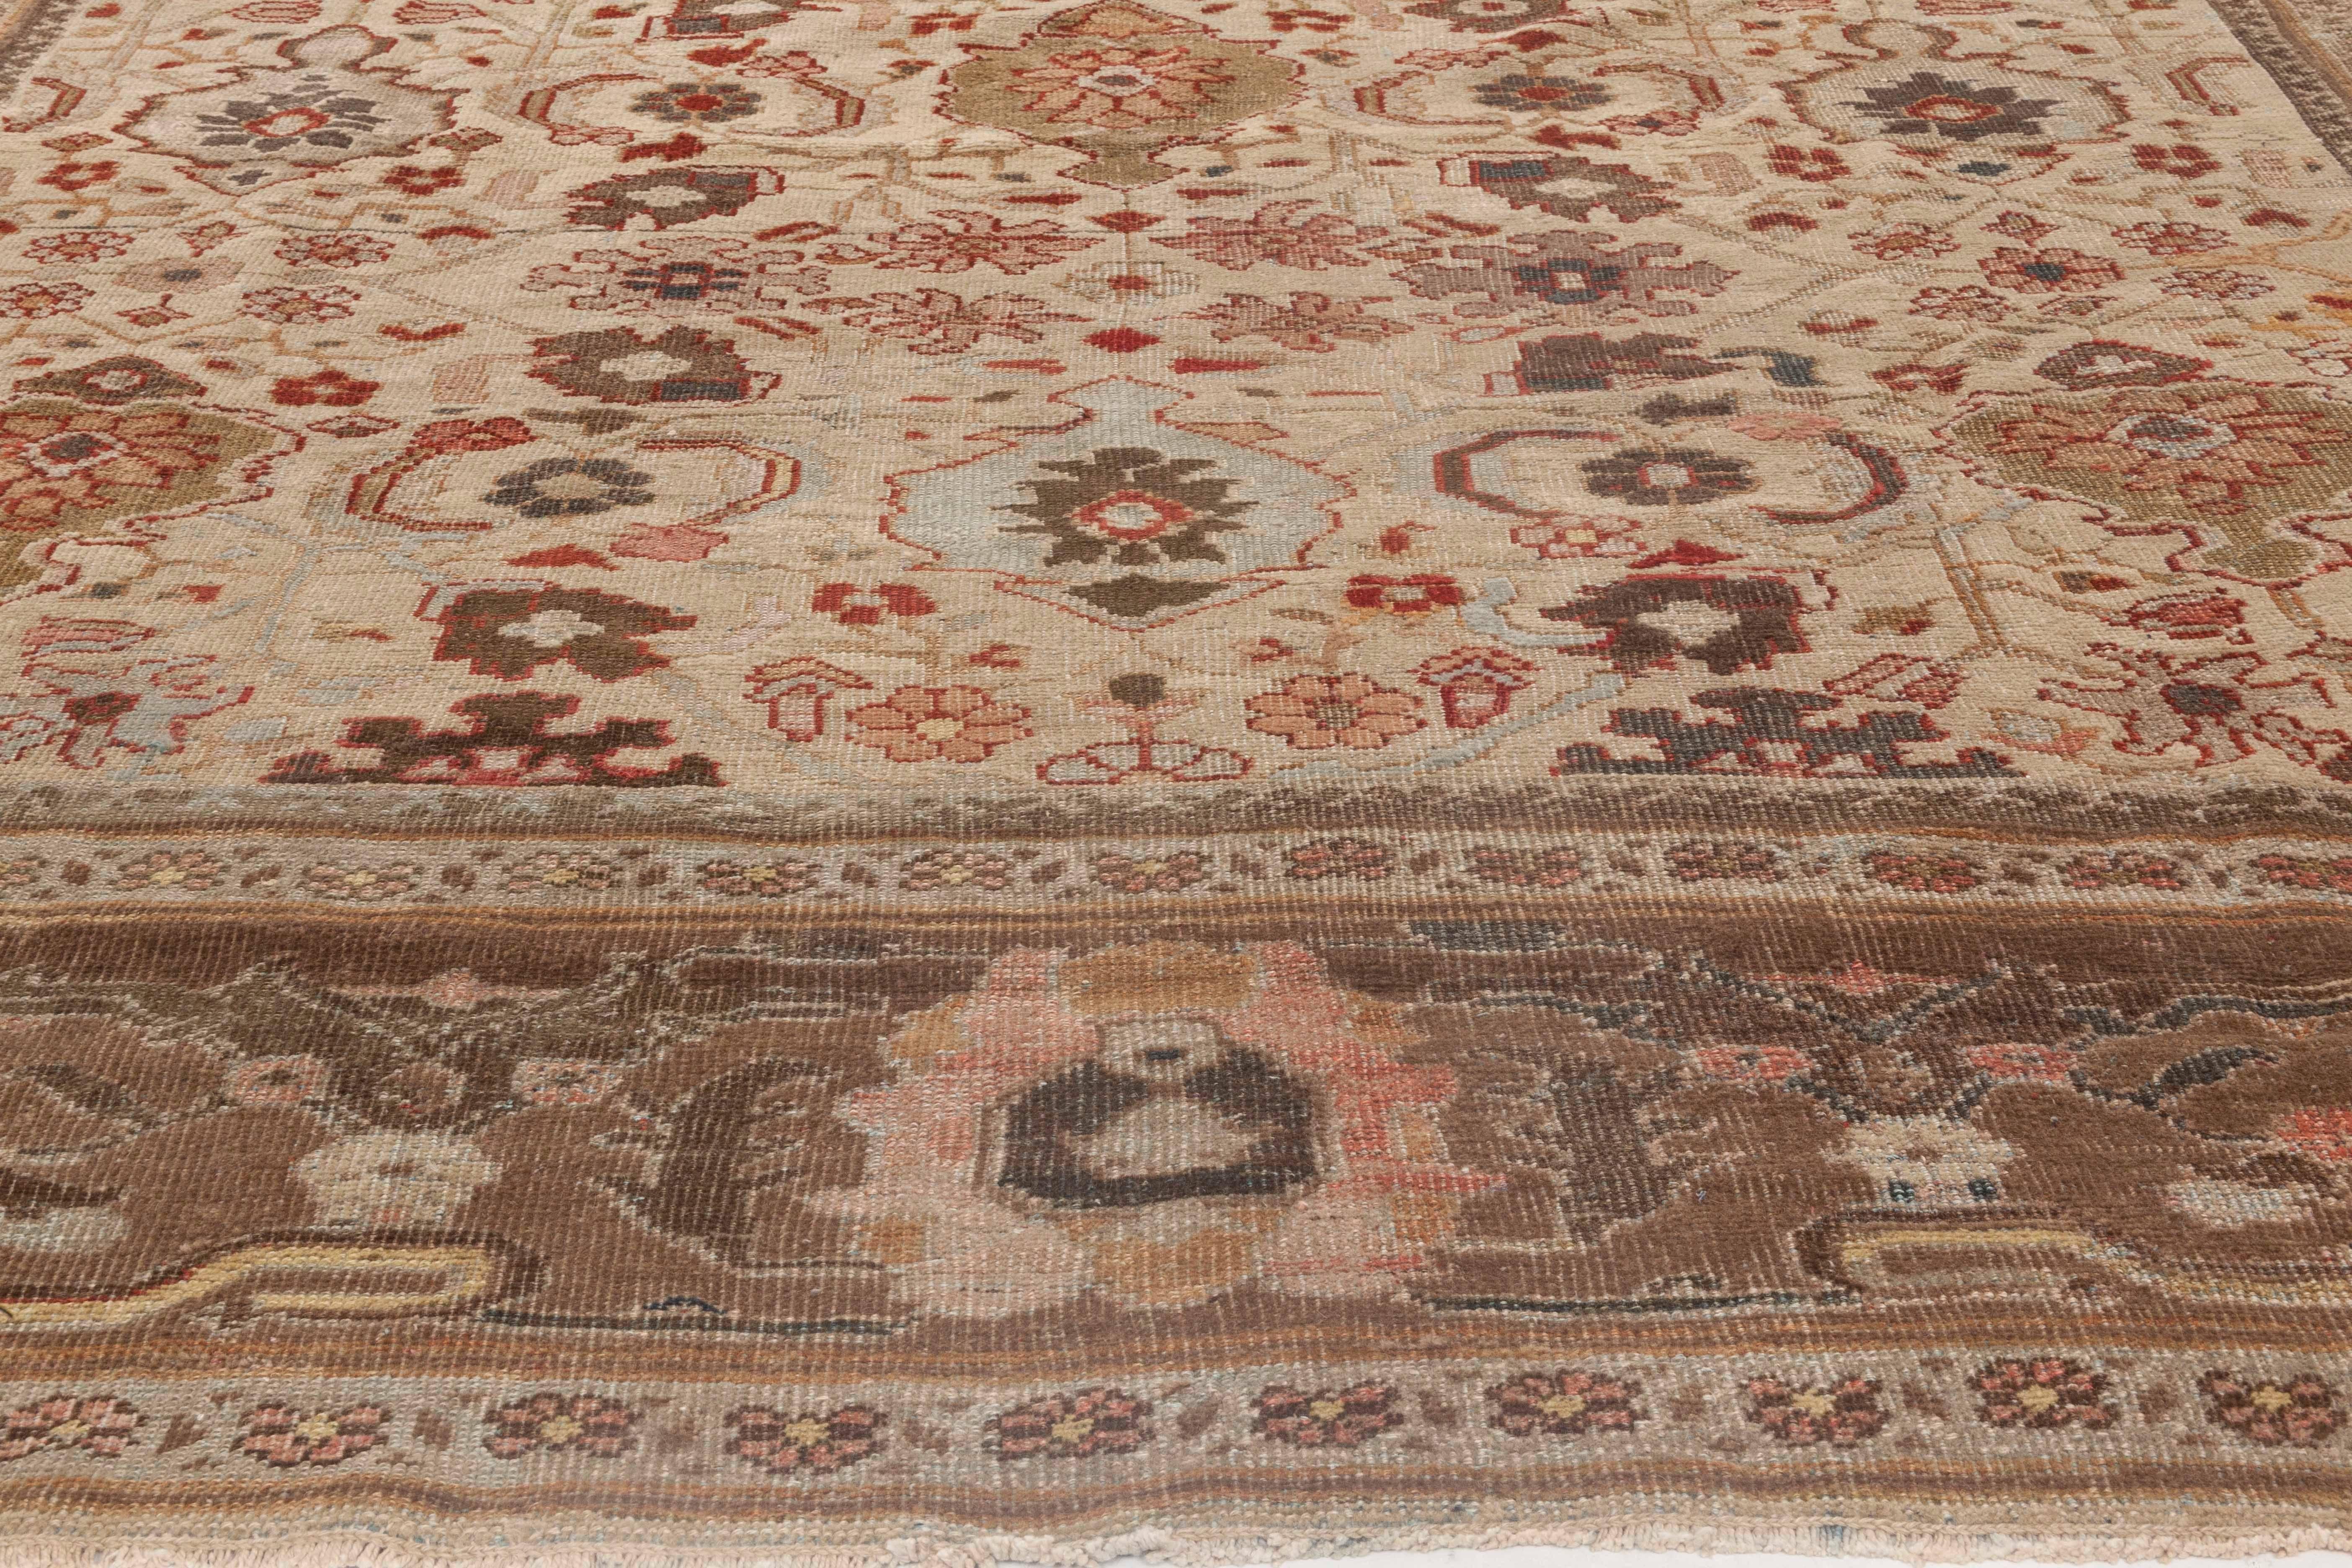 Midcentury Persian Sultanabad Handmade Wool Rug In Good Condition For Sale In New York, NY